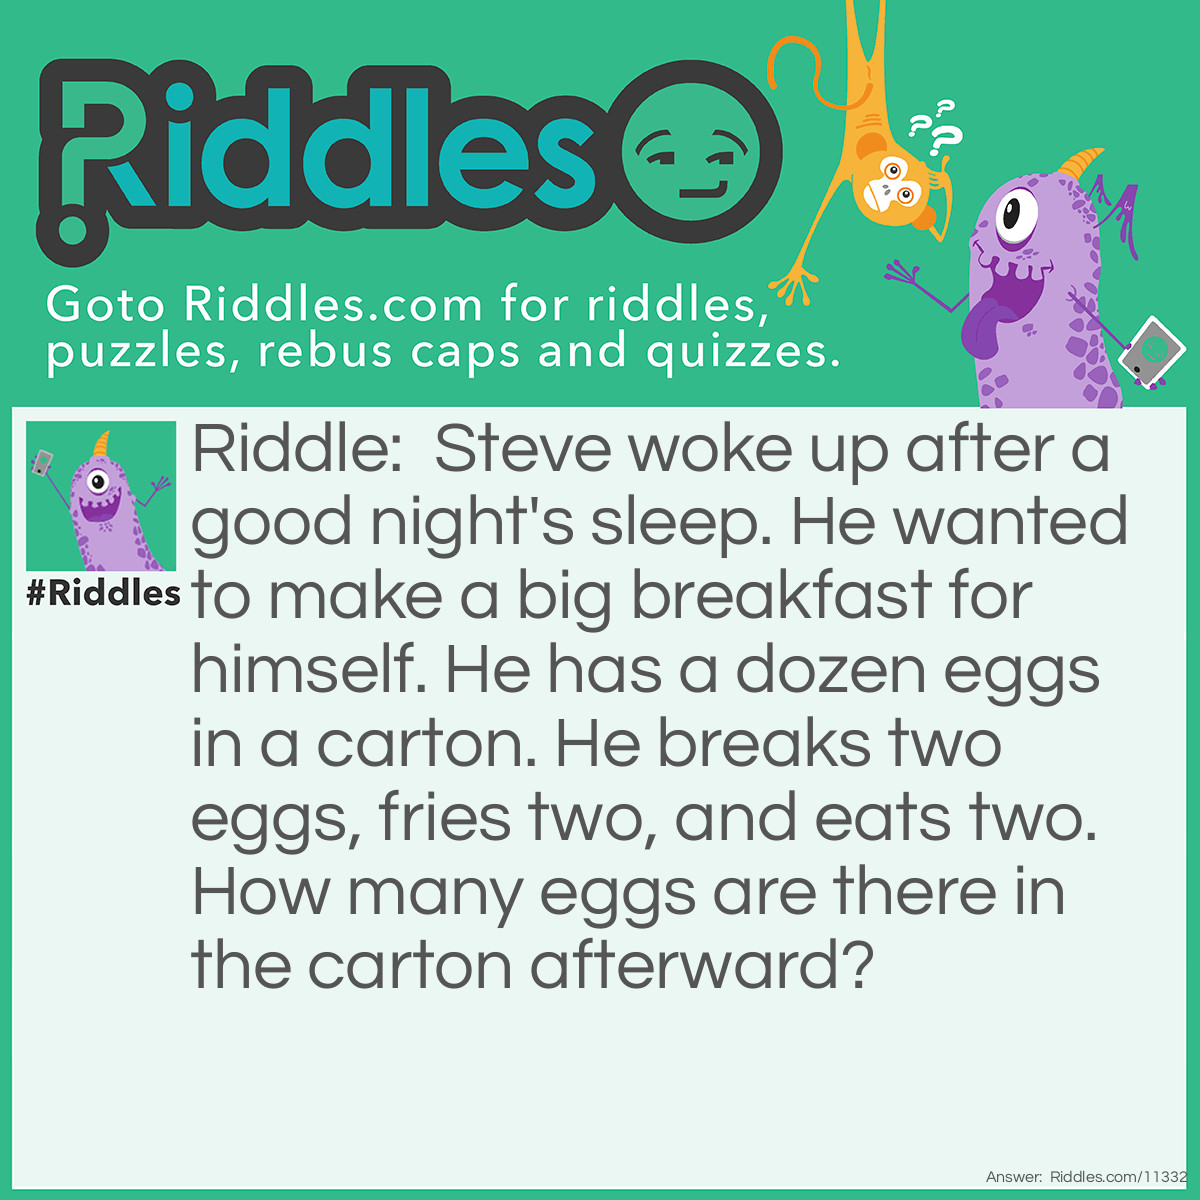 Riddle: Steve woke up after a good night's sleep. He wanted to make a big breakfast for himself. He has a dozen eggs in a carton. He breaks two eggs, fries two, and eats two. How many eggs are there in the carton afterward? Answer: Afterwards, there are 10 eggs in the carton. Steve broke, fried, and ate the same two eggs. This is because: 1) cooking the egg while it is still in its shell would be considered boiling the egg, not frying it; after all, you would need to break the egg into a pan before frying it, and; 2) you cannot eat a raw egg while it is still in the shell because of the risk of foodborne illnesses.